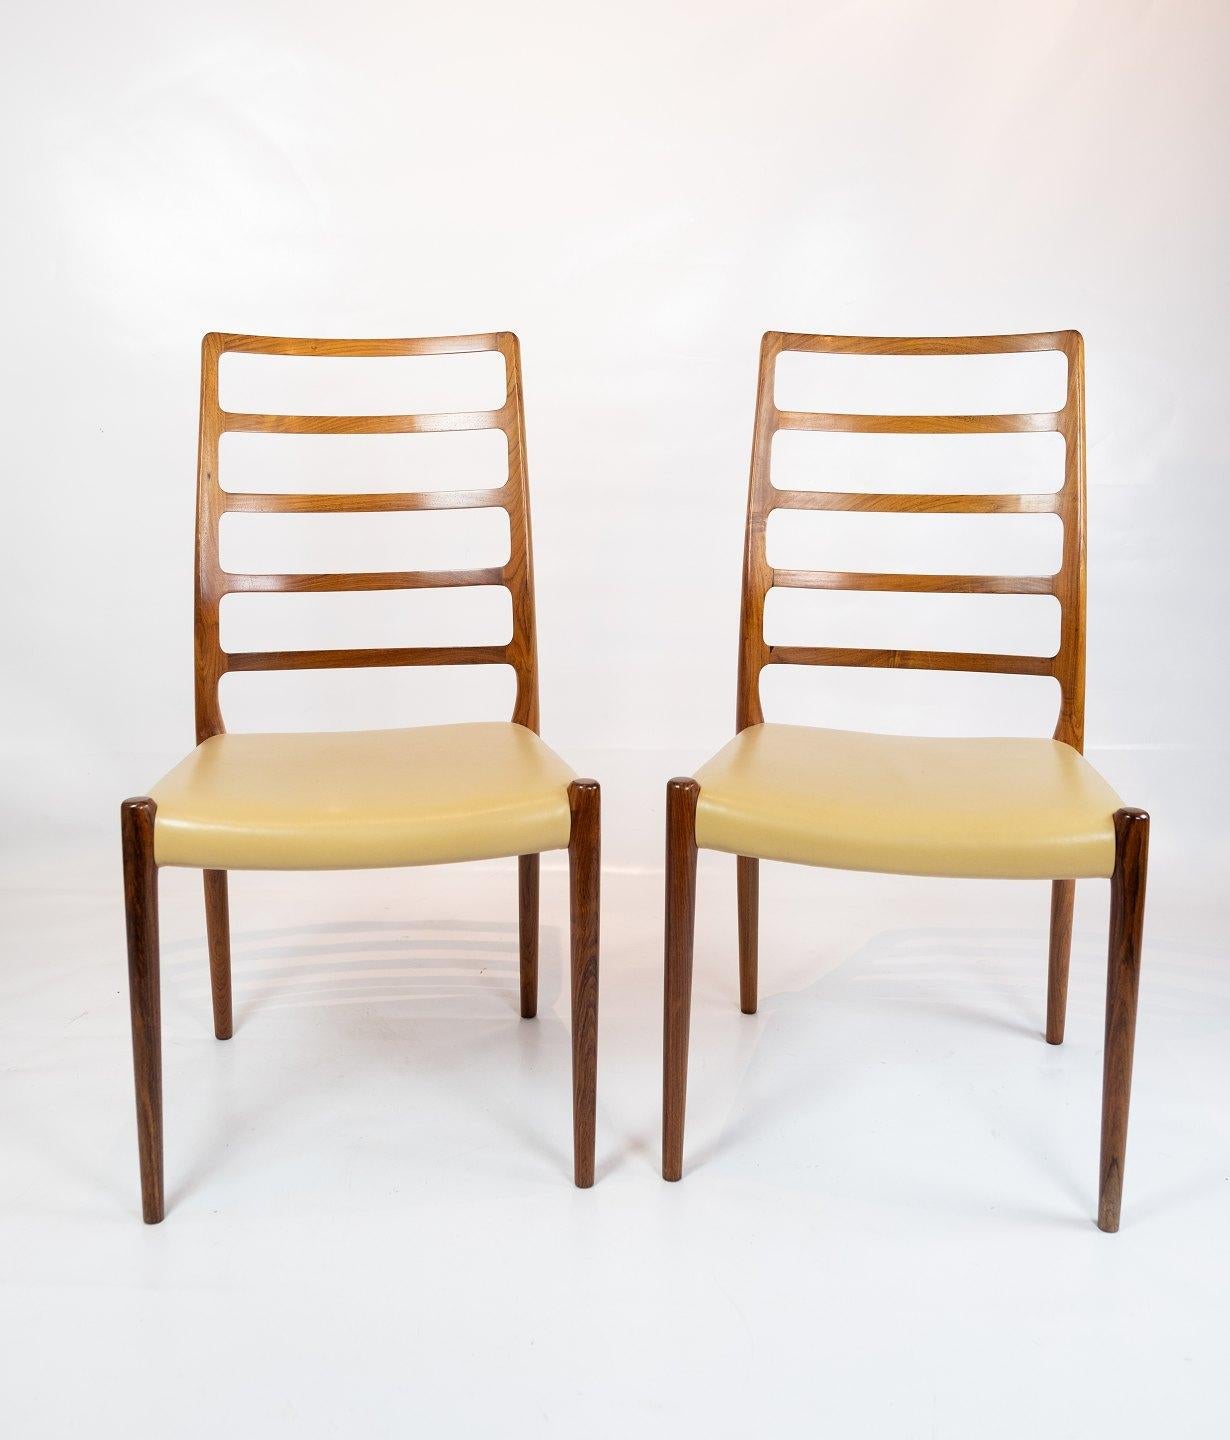 Danish Set of 8 Dining Chairs, Model 82, Designed by N.O. Møller from the 1960s